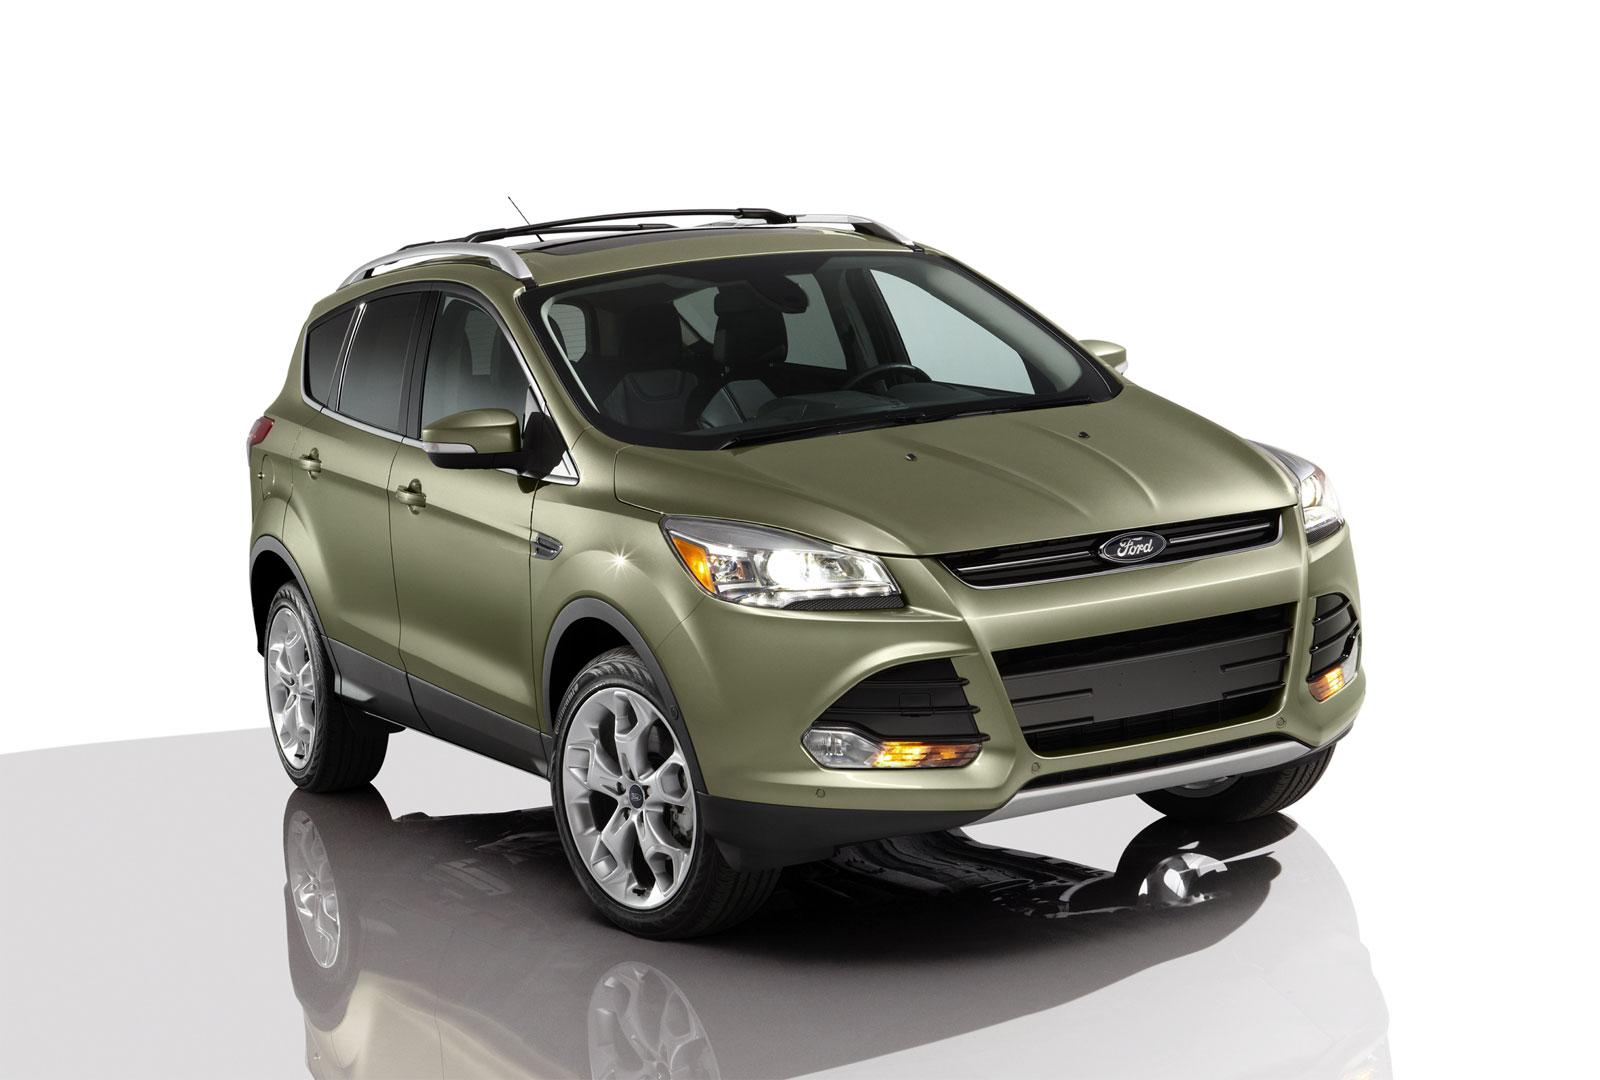 Ford cars: Ford escape 20 ecoboost